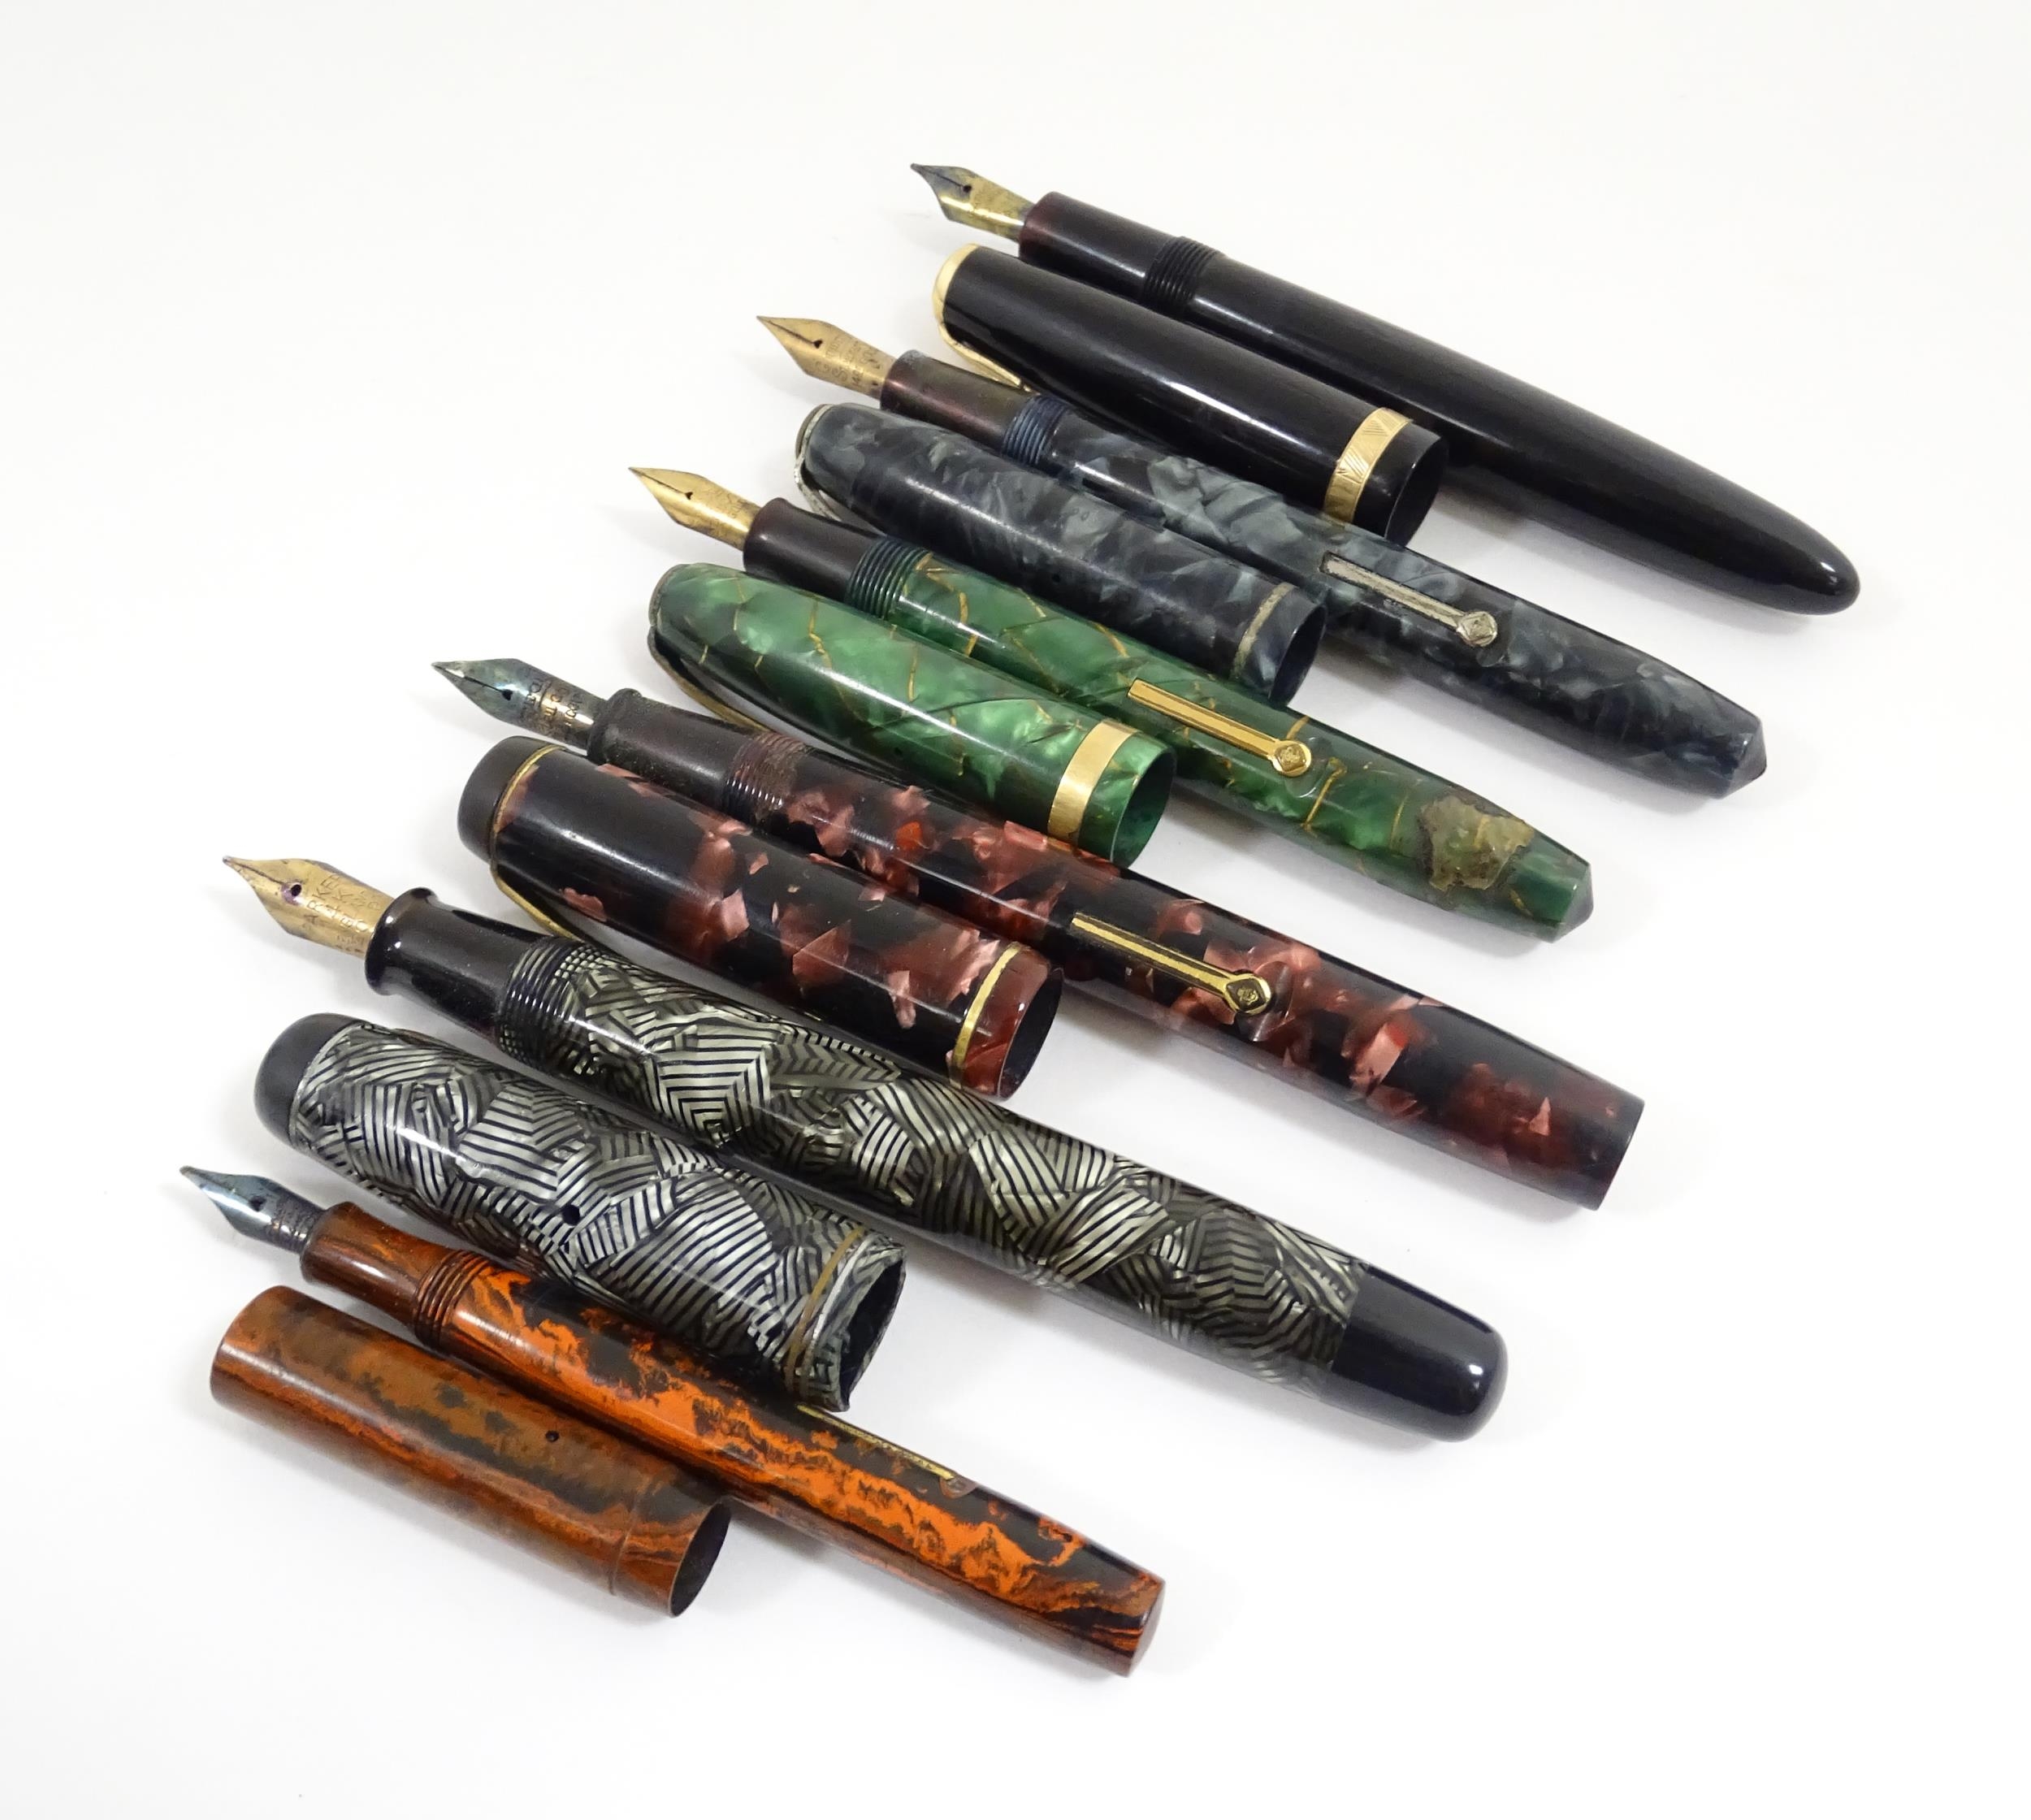 Six fountain pens with 14ct nibs, to include a Parker 'Duofold' with black finish and 14kt gold nib, - Image 6 of 22